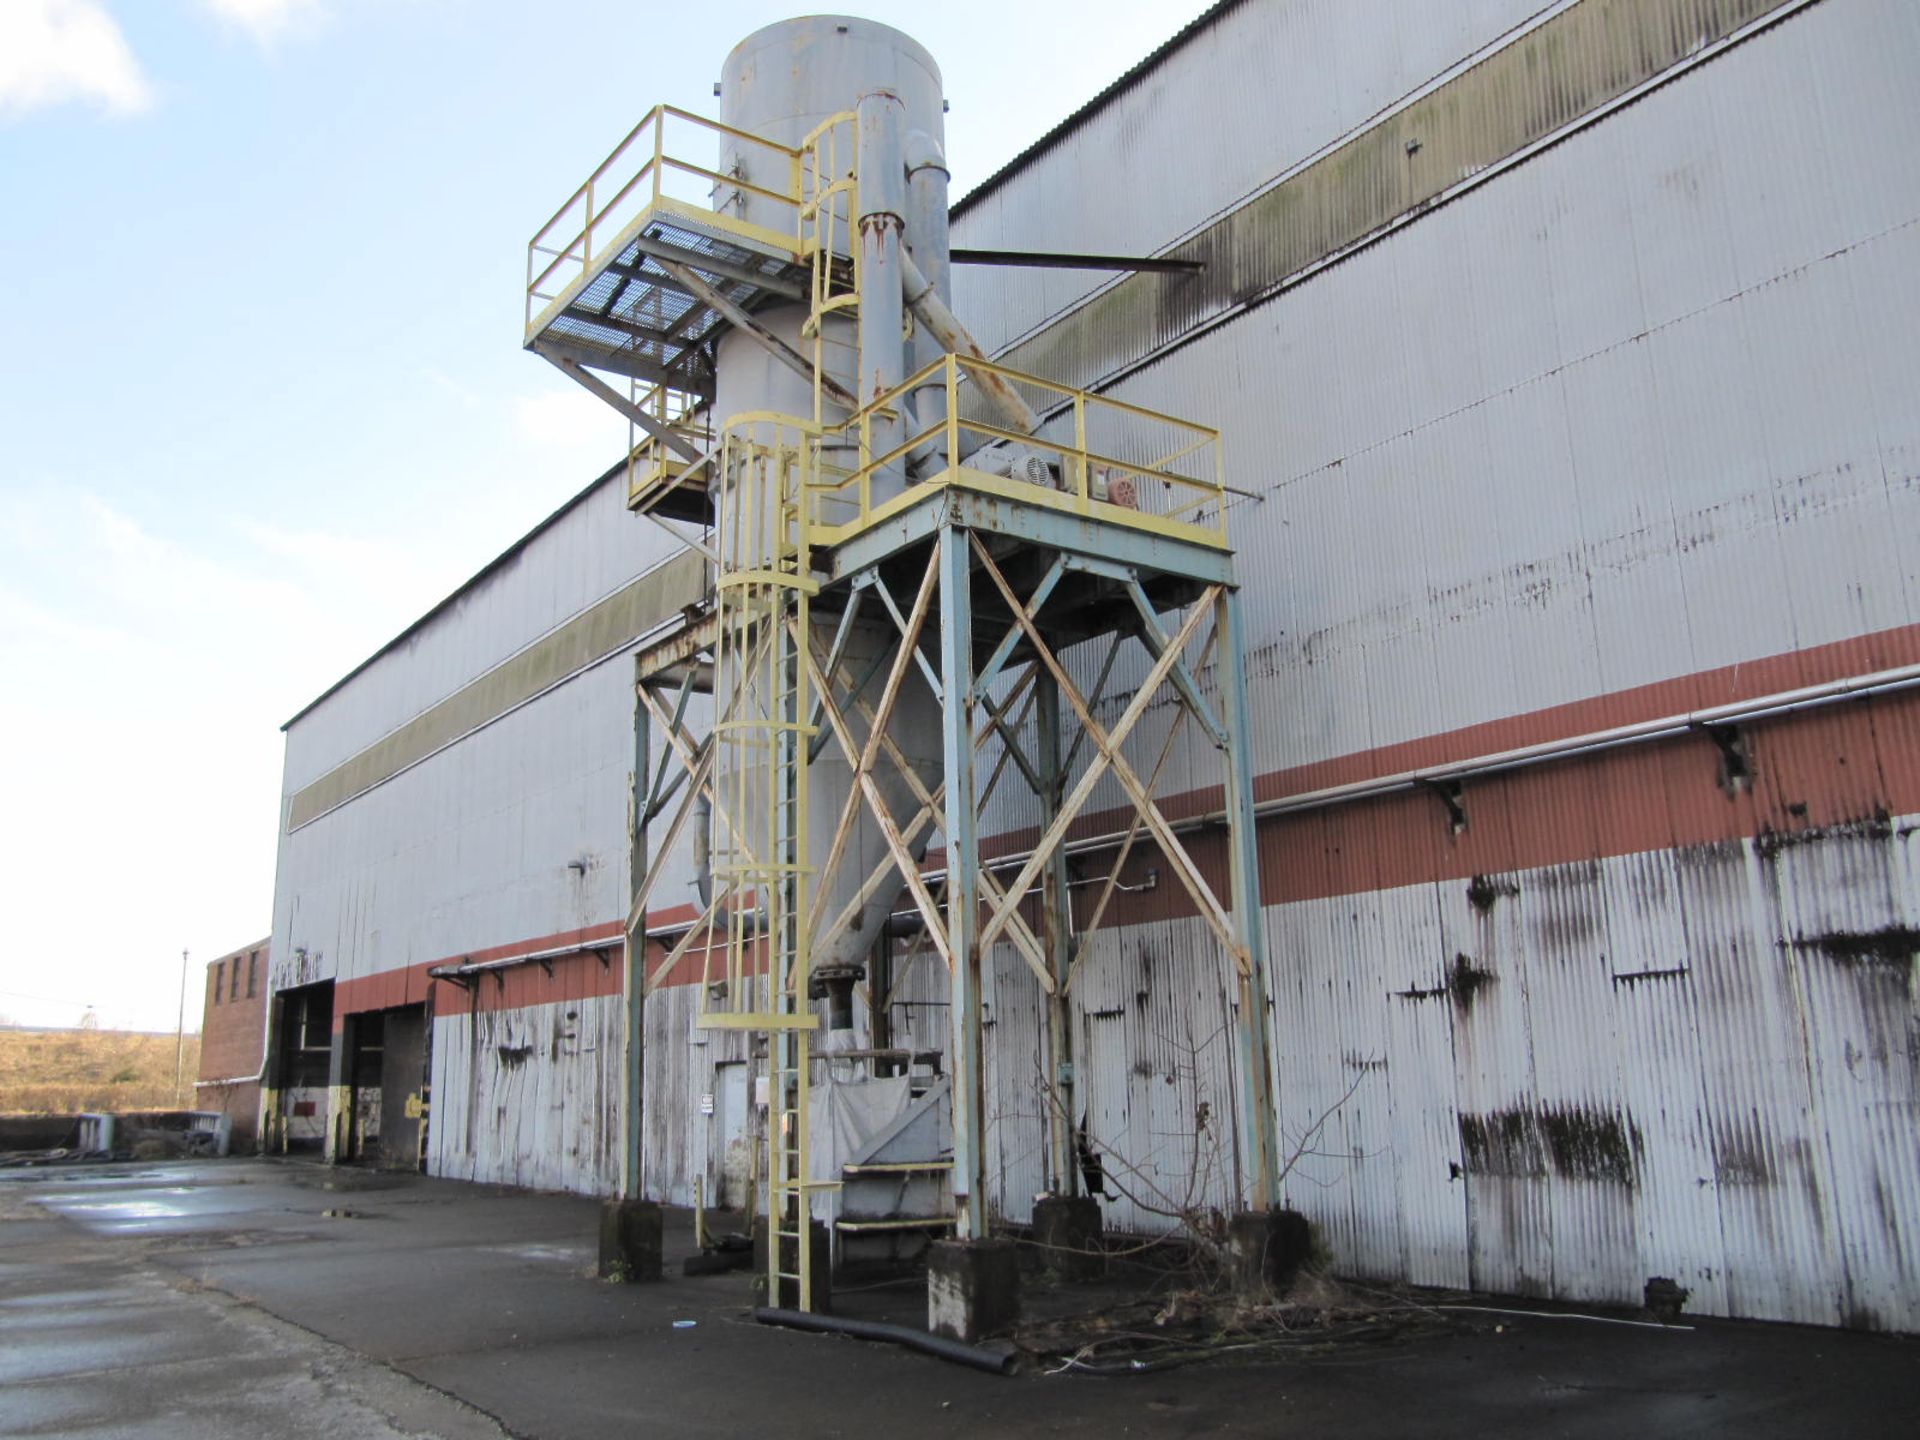 Dust collector, Cyclone type, approx. 30' straight side, 8' dia., top platform blower, bag fill